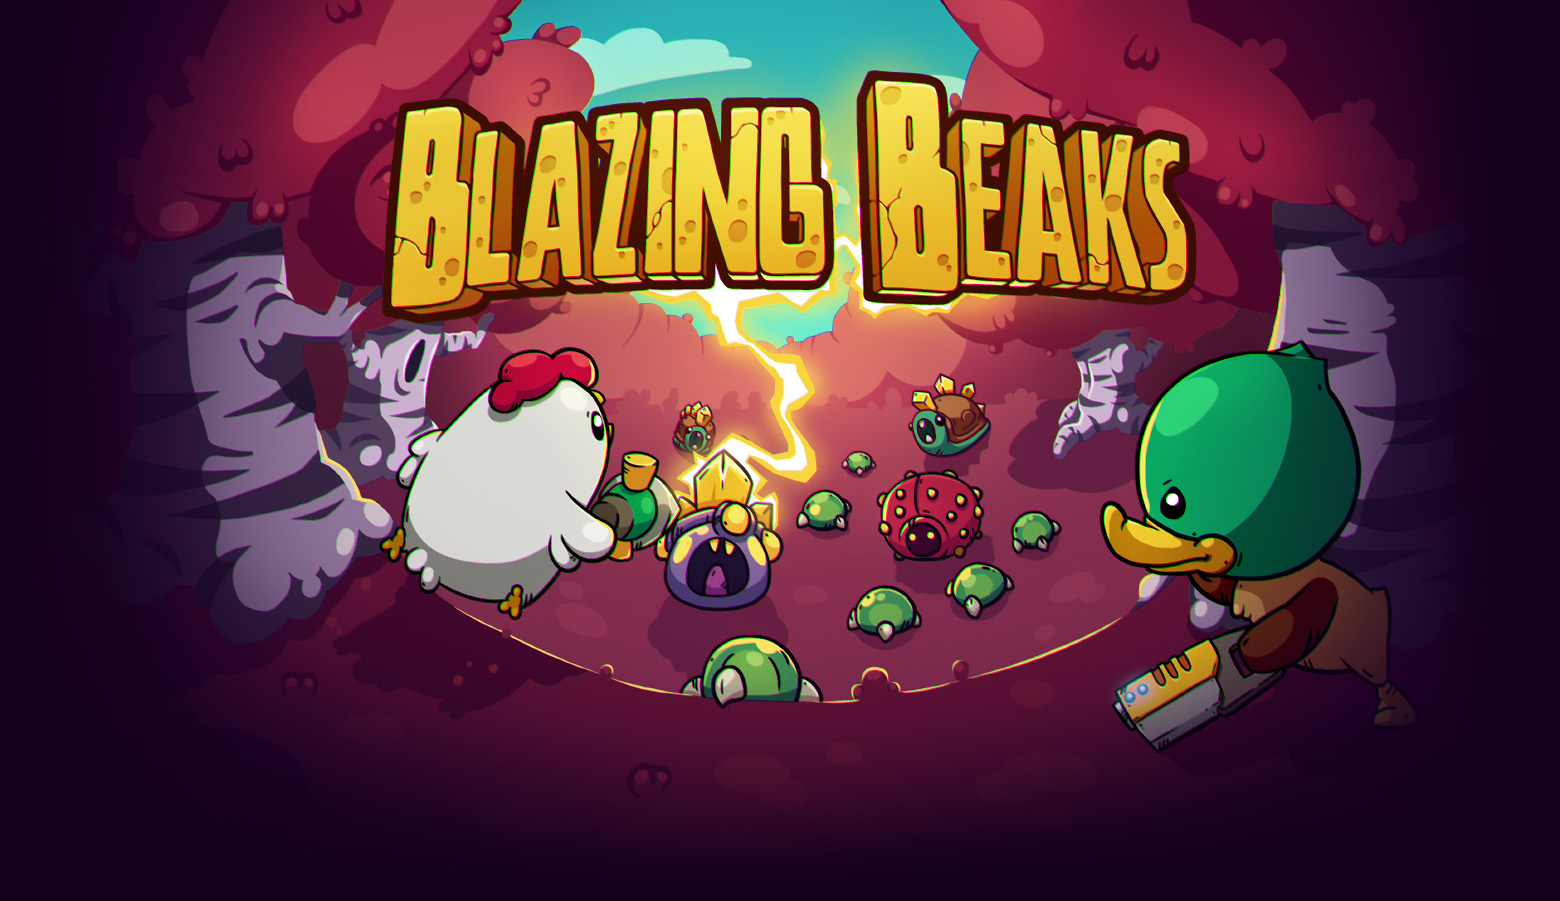 Blazing Beaks download the new for apple